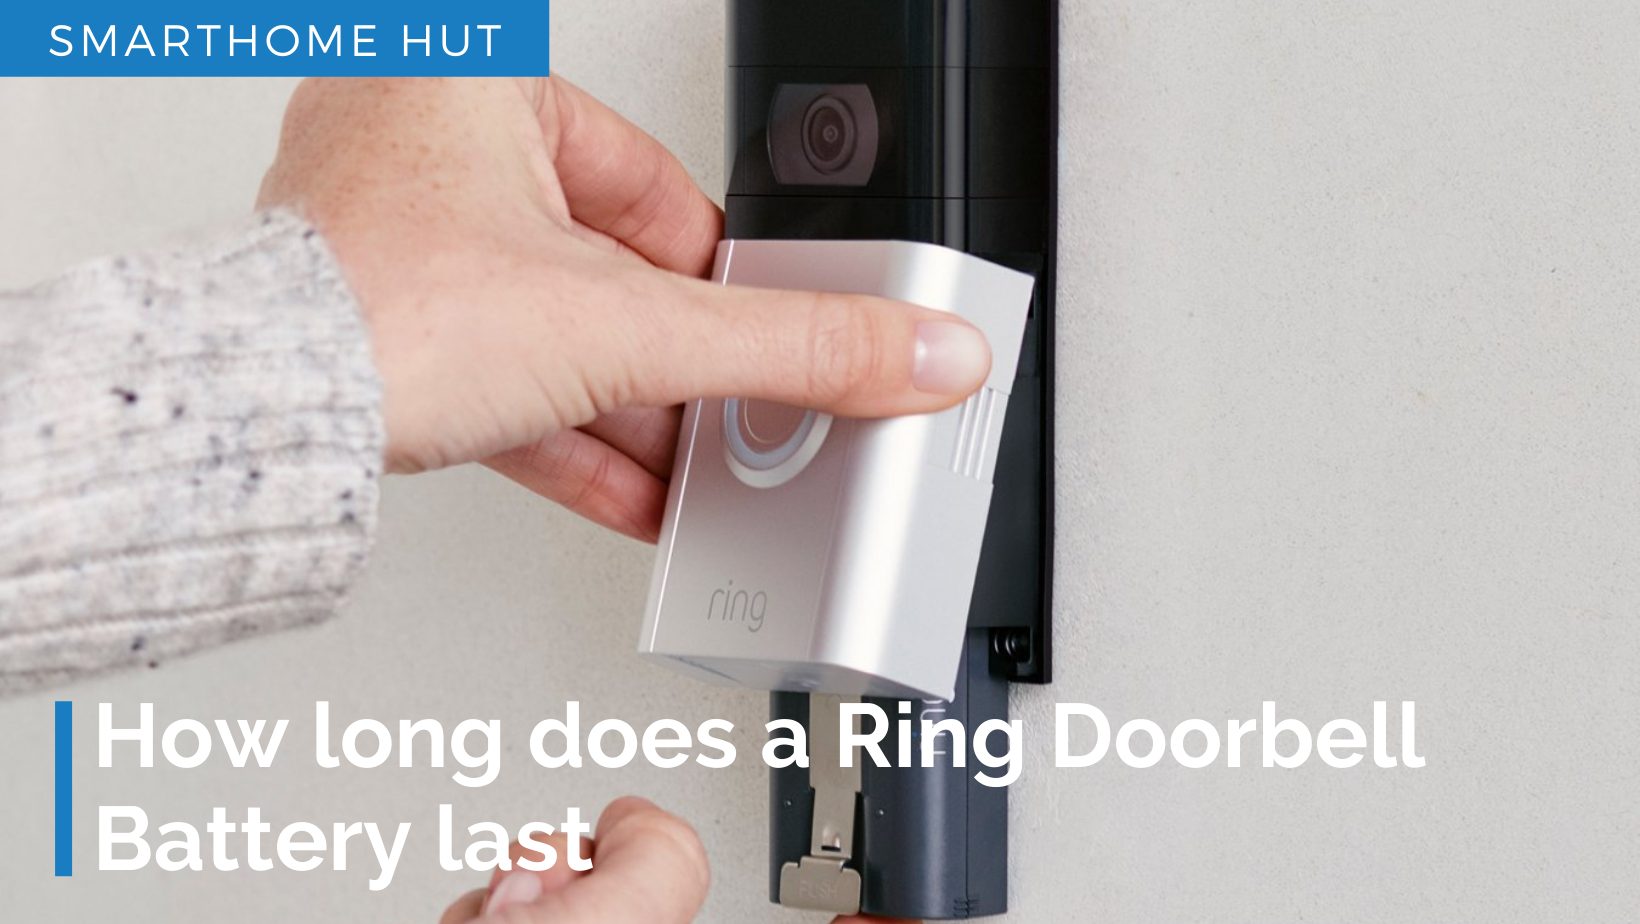 How long does a Ring Doorbell battery last